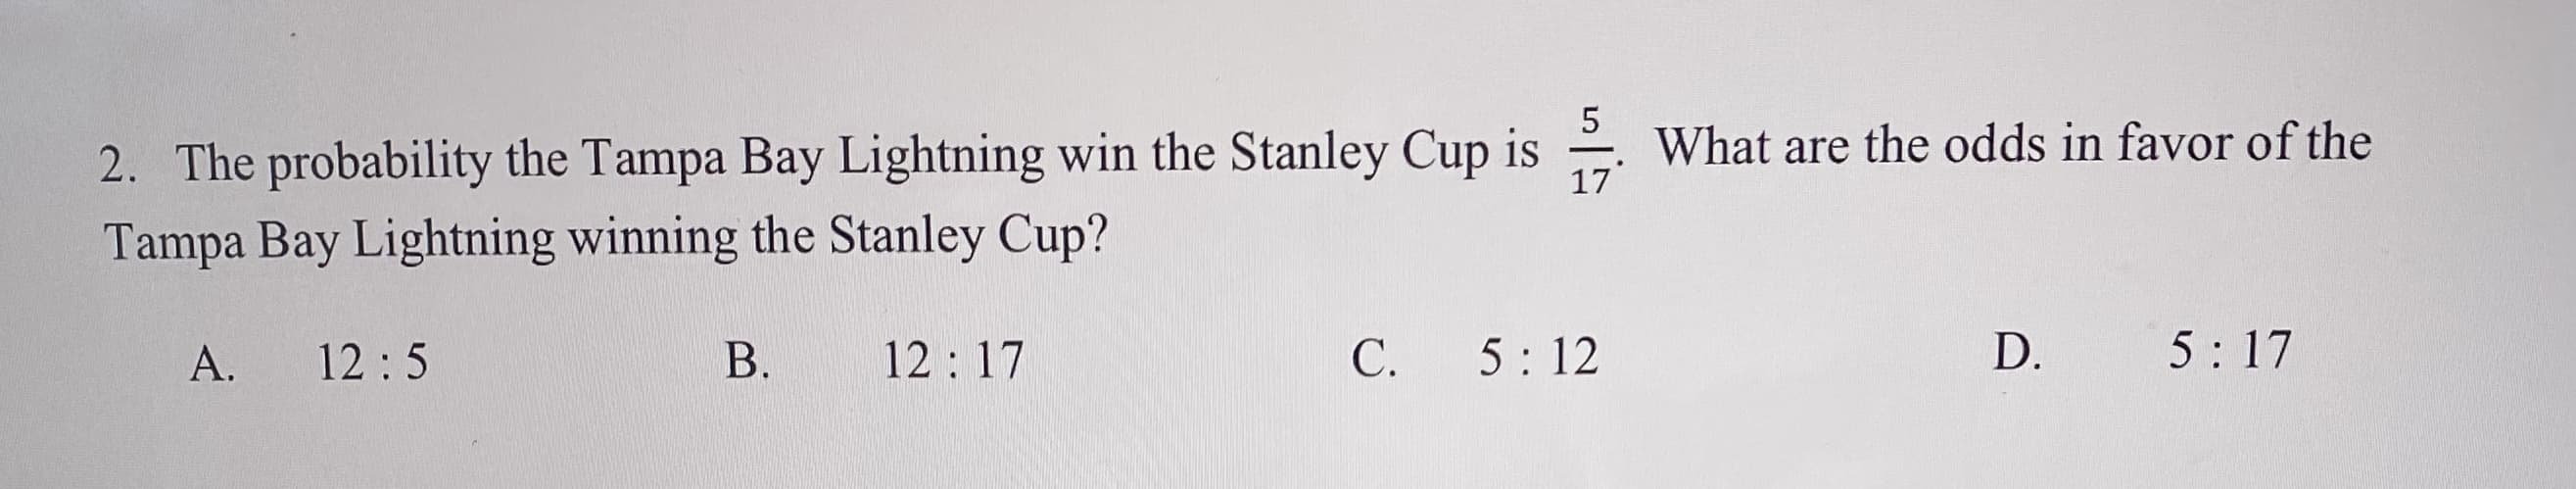 5
What are the odds in favor of the
2. The probability the Tampa Bay Lightning win the Stanley Cup is
Tampa Bay Lightning winning the Stanley Cup?
17
A.
12:5
B.
12:17
C.
5: 12
D.
5: 17
